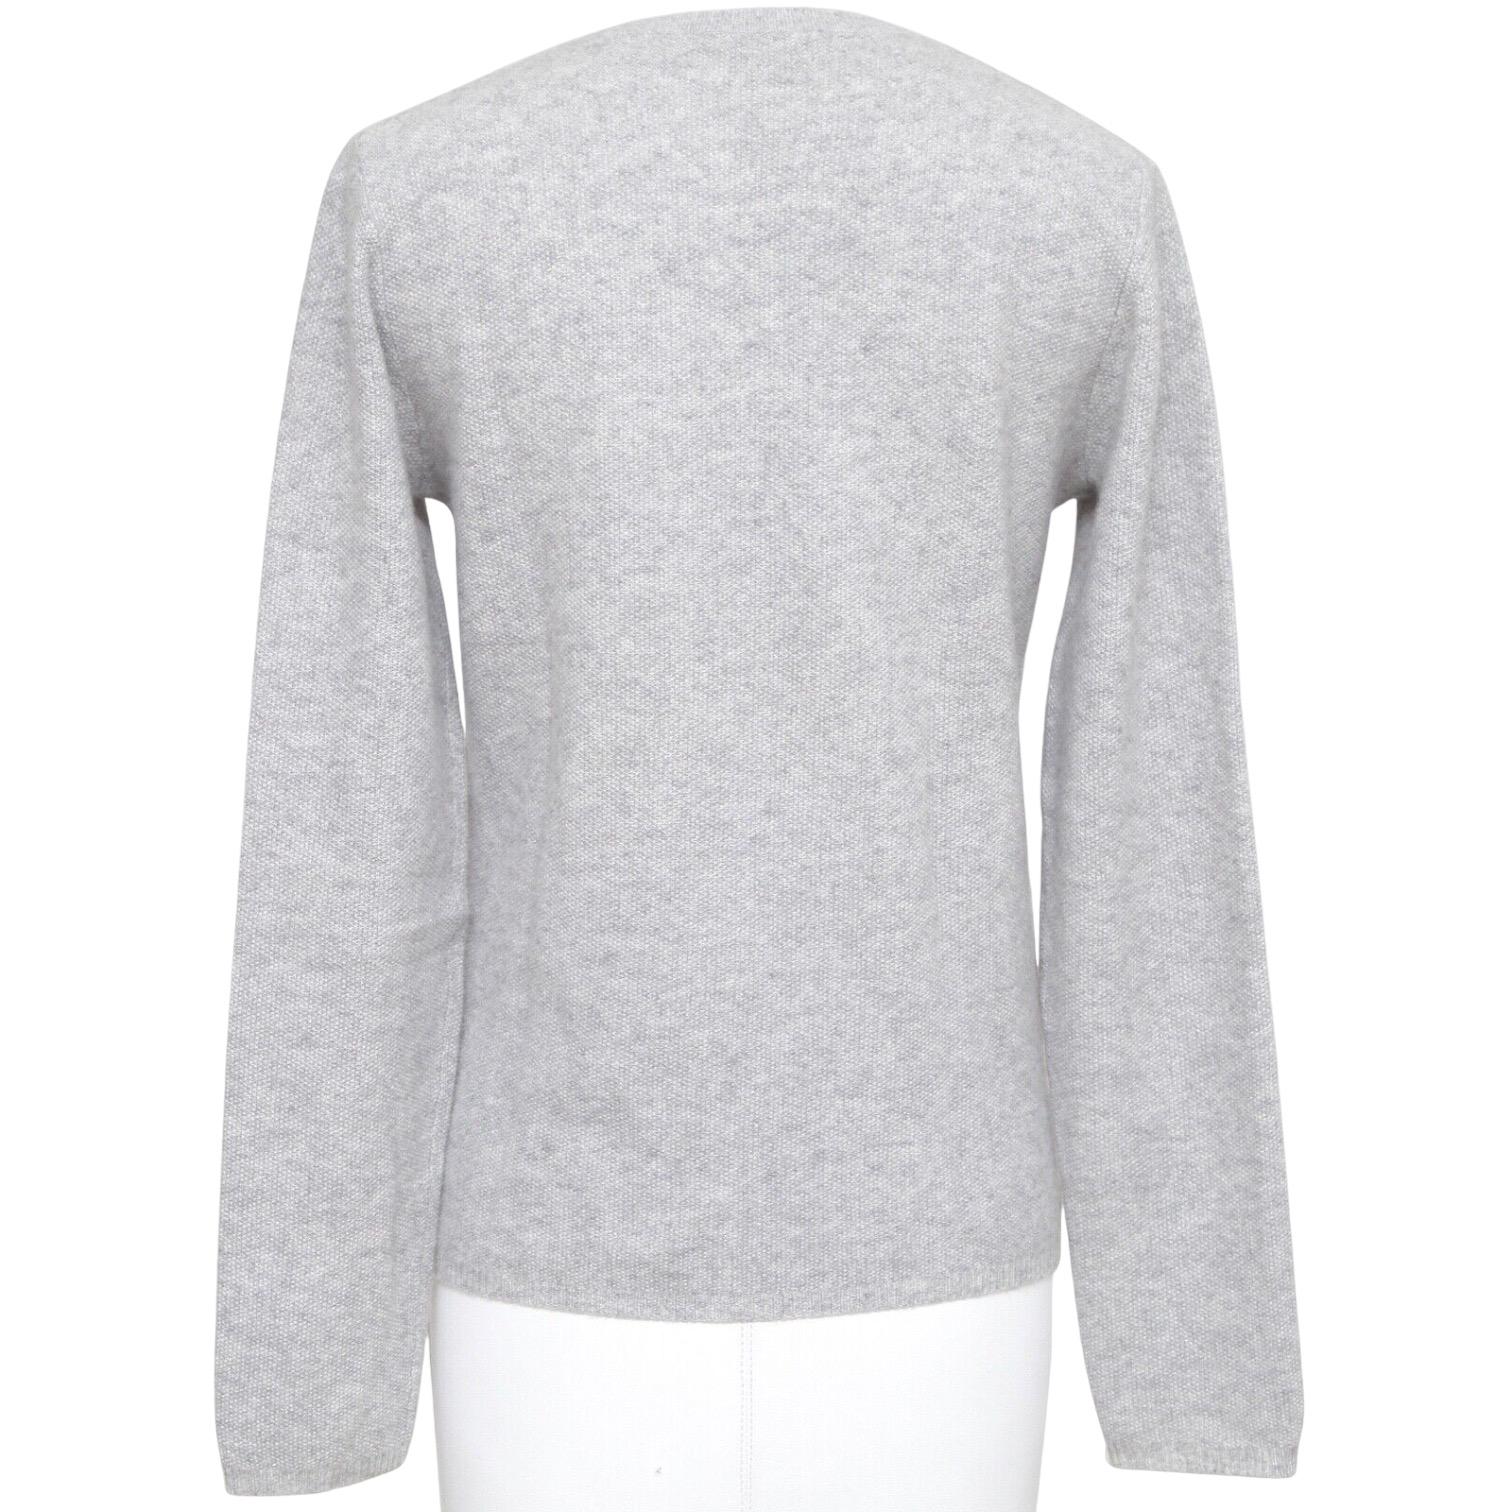 CHLOE Grey Cardigan Sweater Knit Cashmere Long Sleeve Snap Closure Sz XS For Sale 2